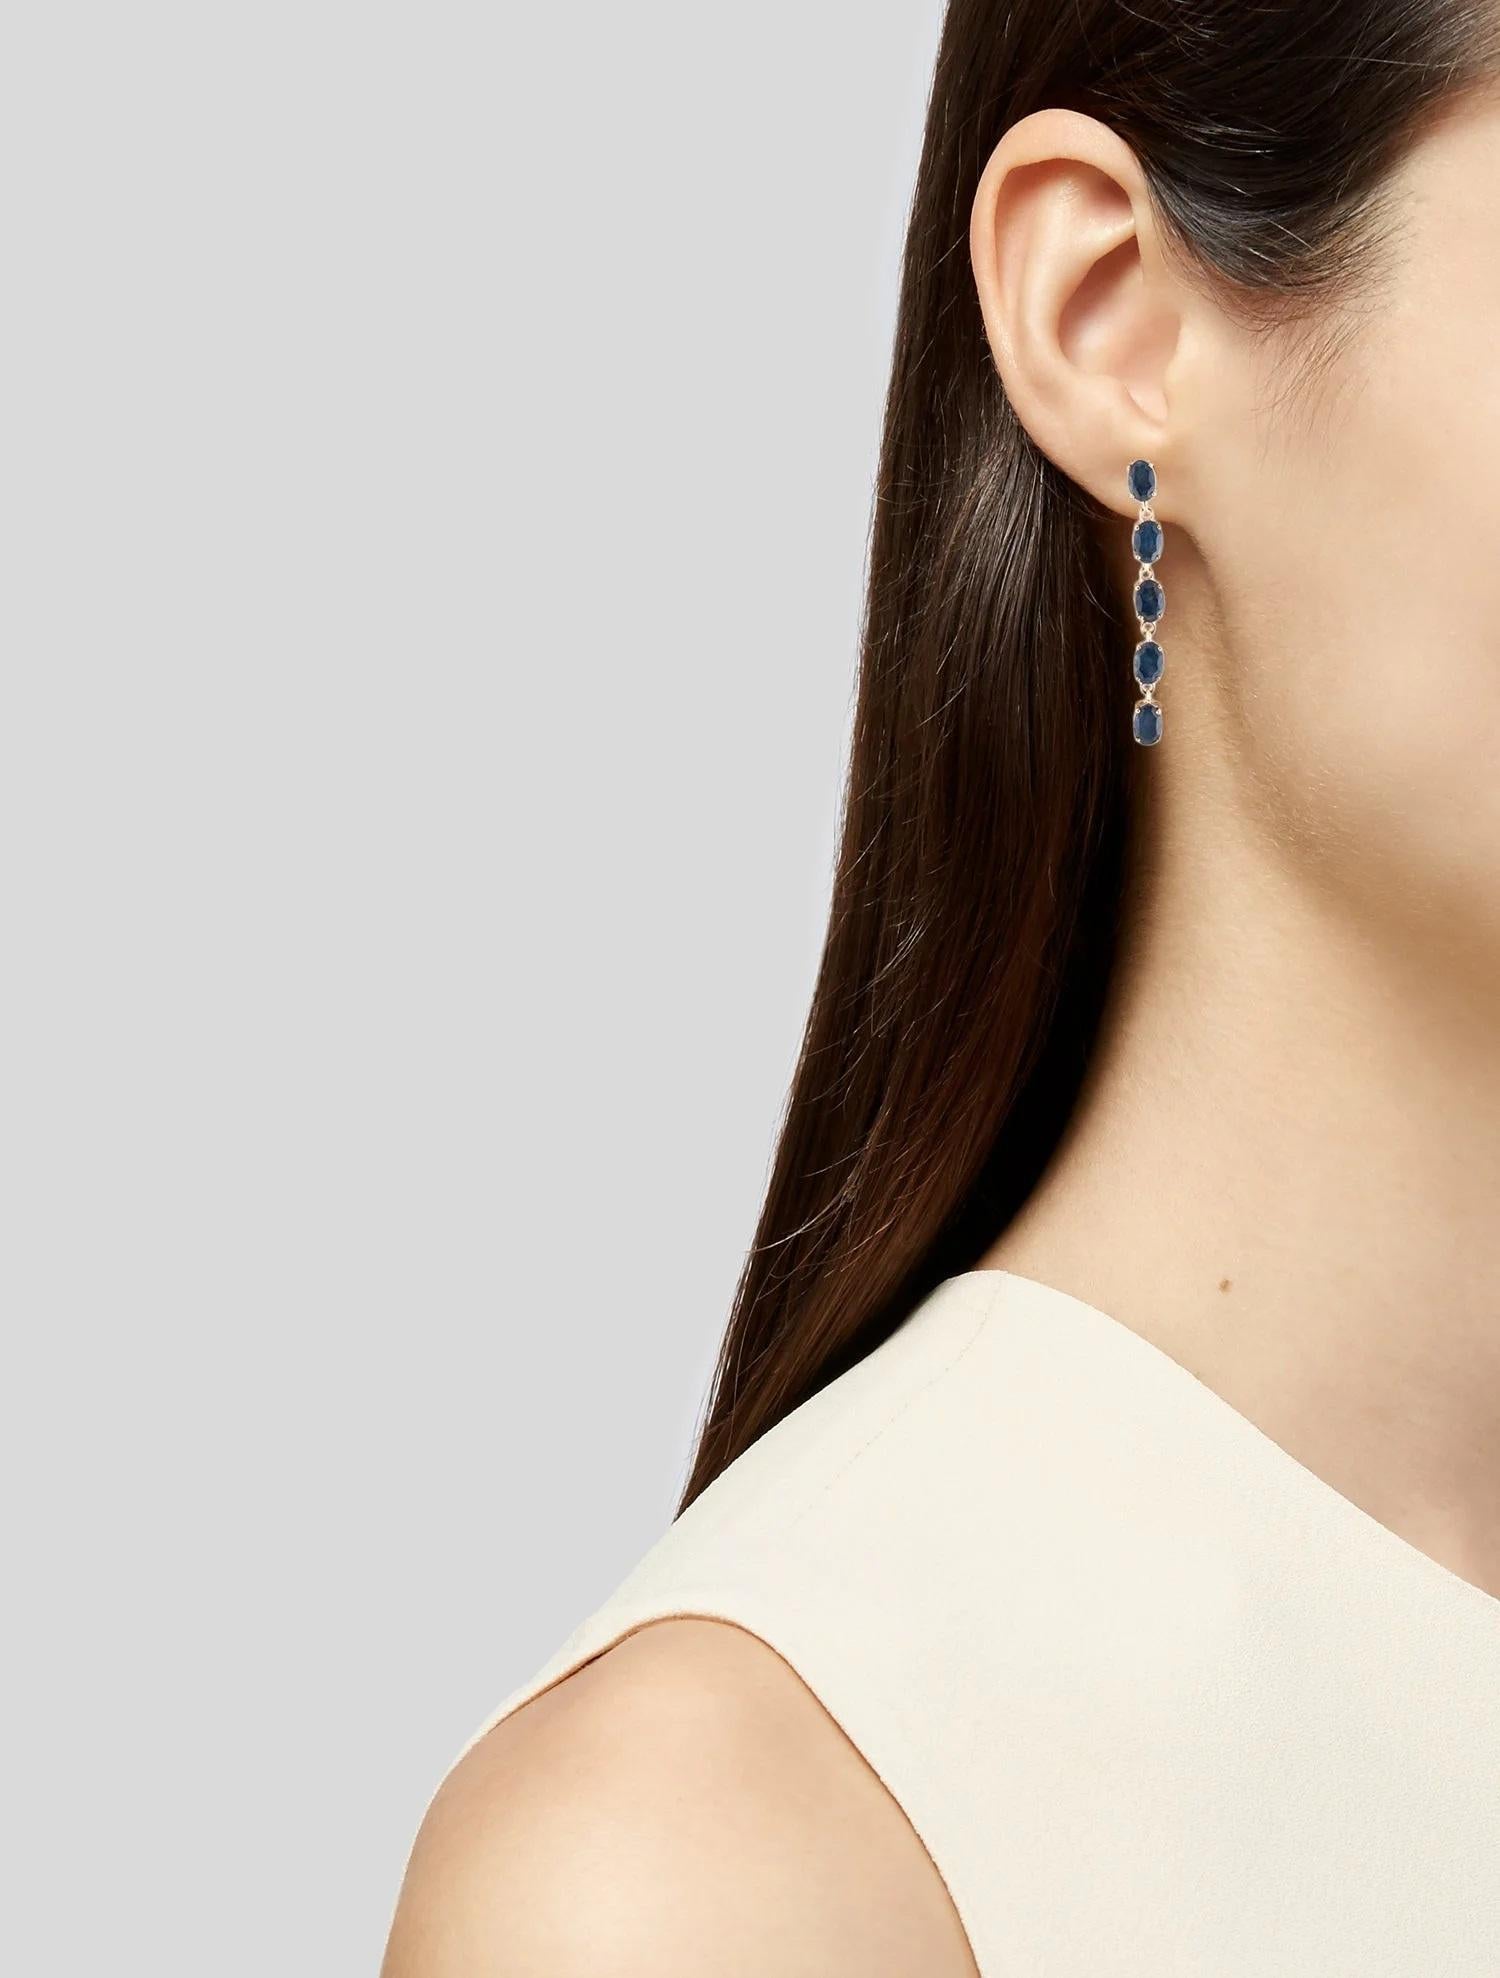 Elevate your elegance with these stunning 14K yellow gold earrings, each featuring an enchanting 6.11 carat oval brilliant blue sapphire. Crafted with precision and care, these earrings are a symbol of sophistication and timeless beauty. The deep